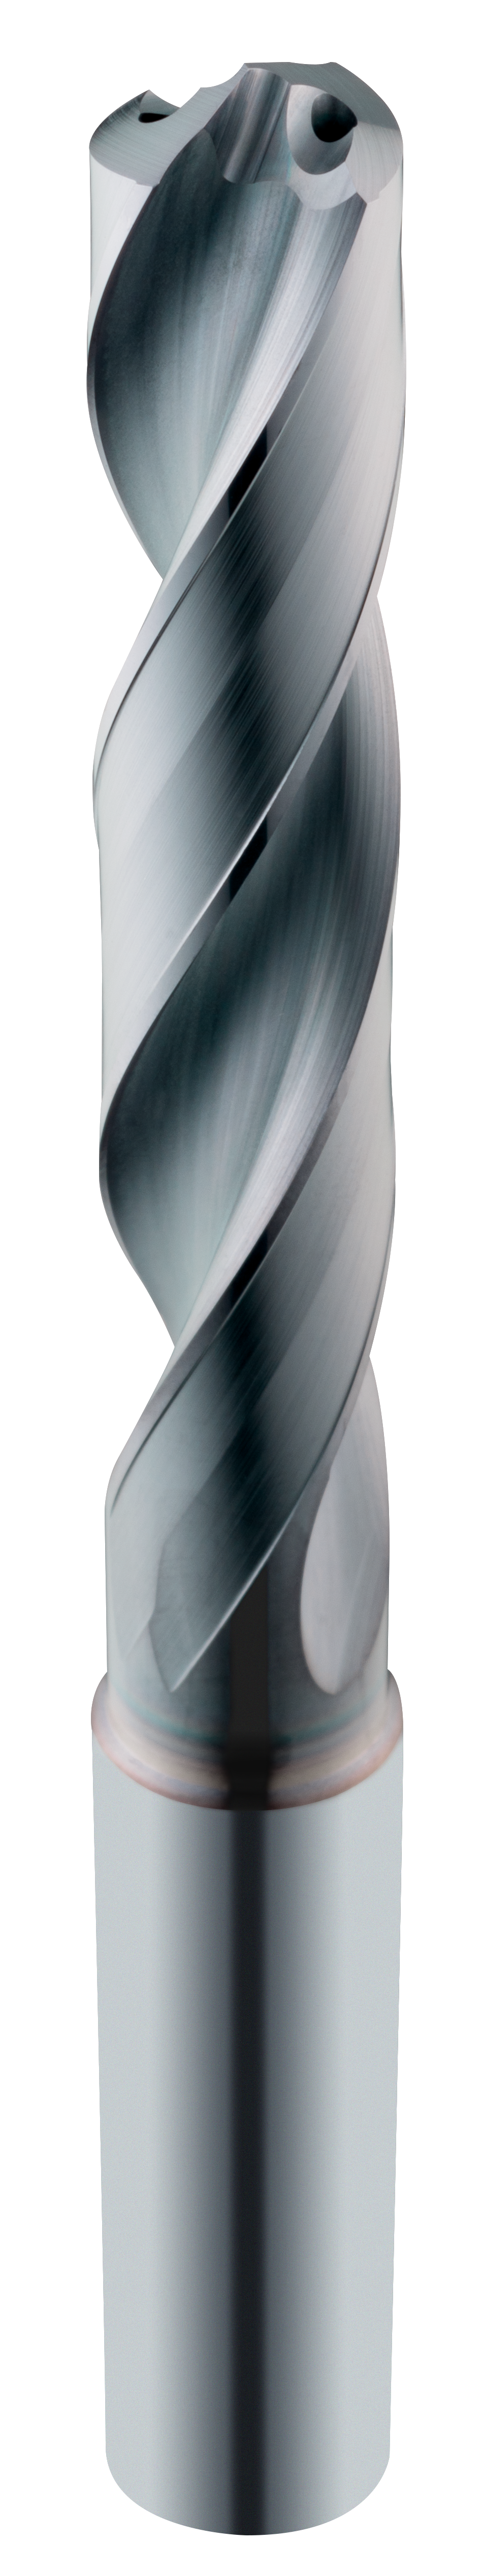 5.30mm Dia, 137 Degree Point, Solid Carbide Drill - 66423